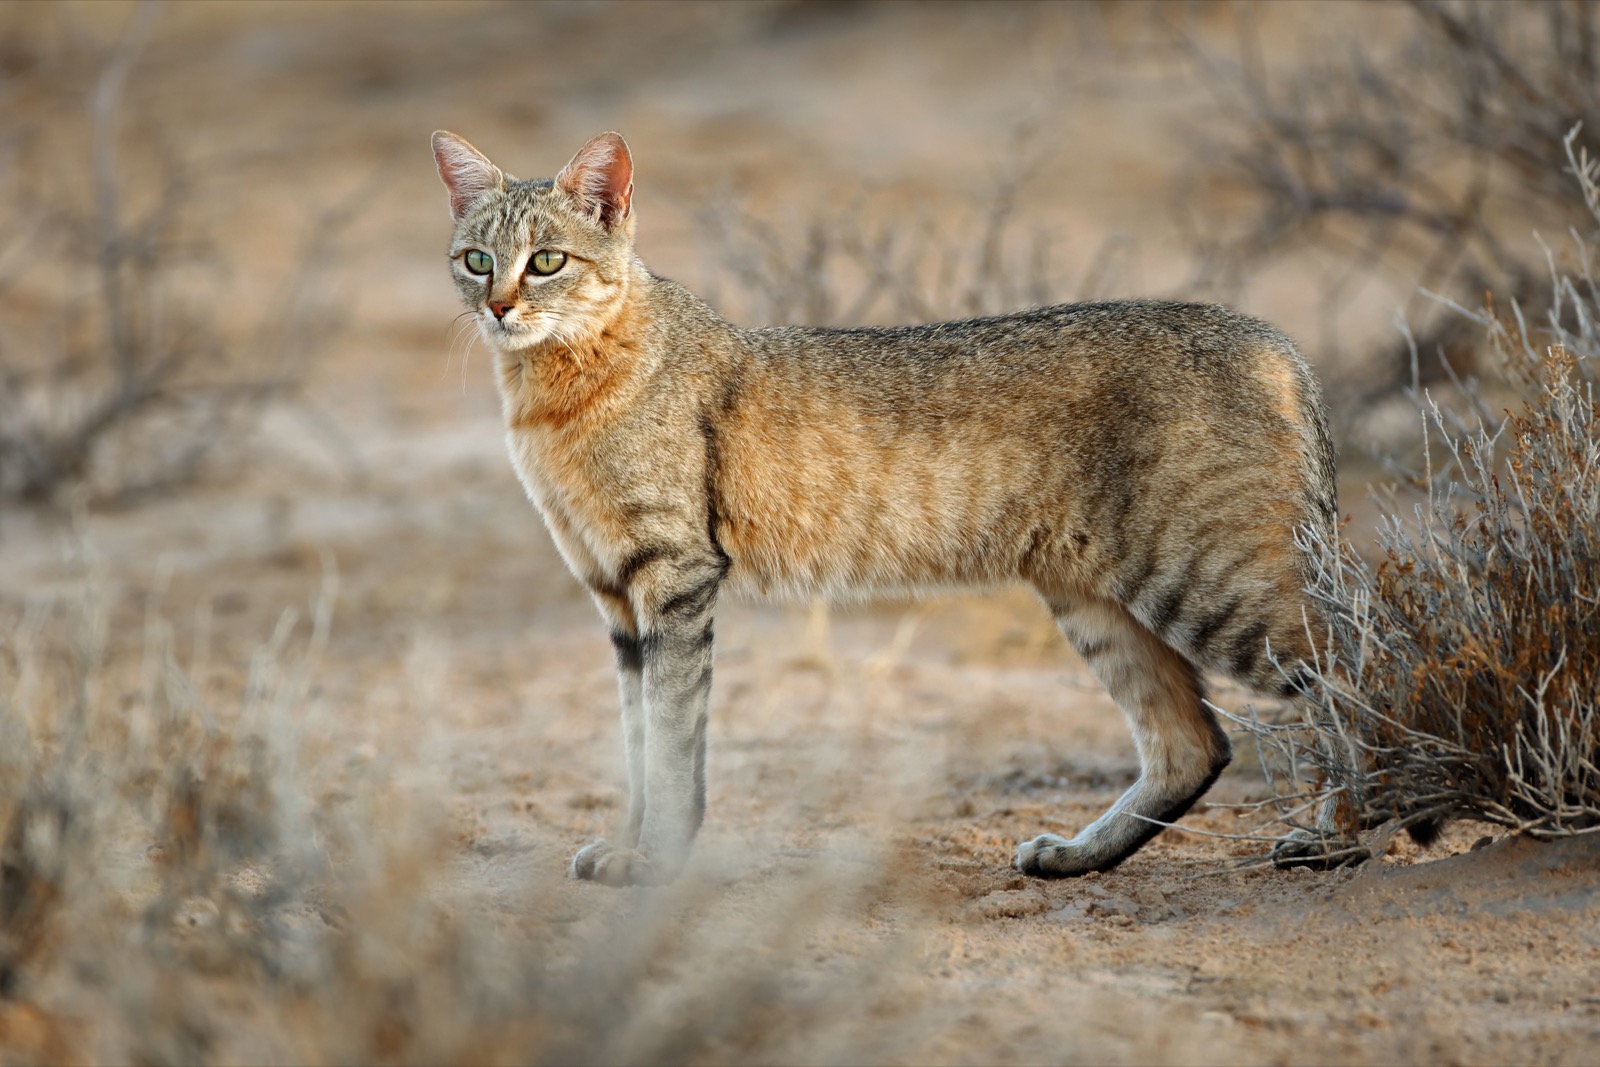 A large striped cat with a reddish brown body and legs fading to gray stands among shrubs in the sand.